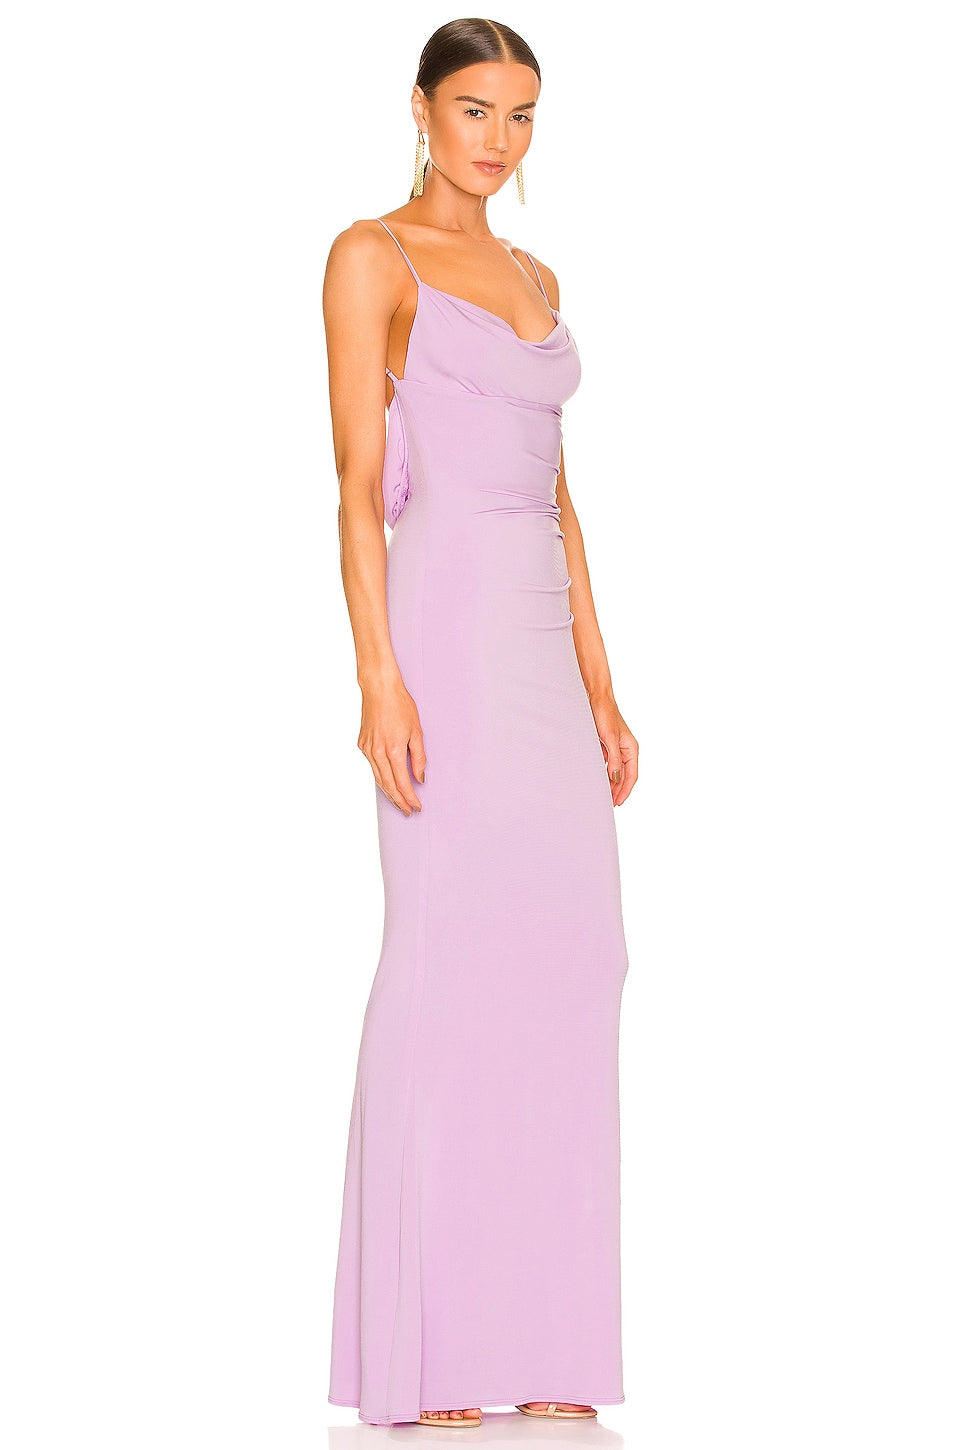 Katie May Surreal Gown in Lilac SIZE X-SMALL